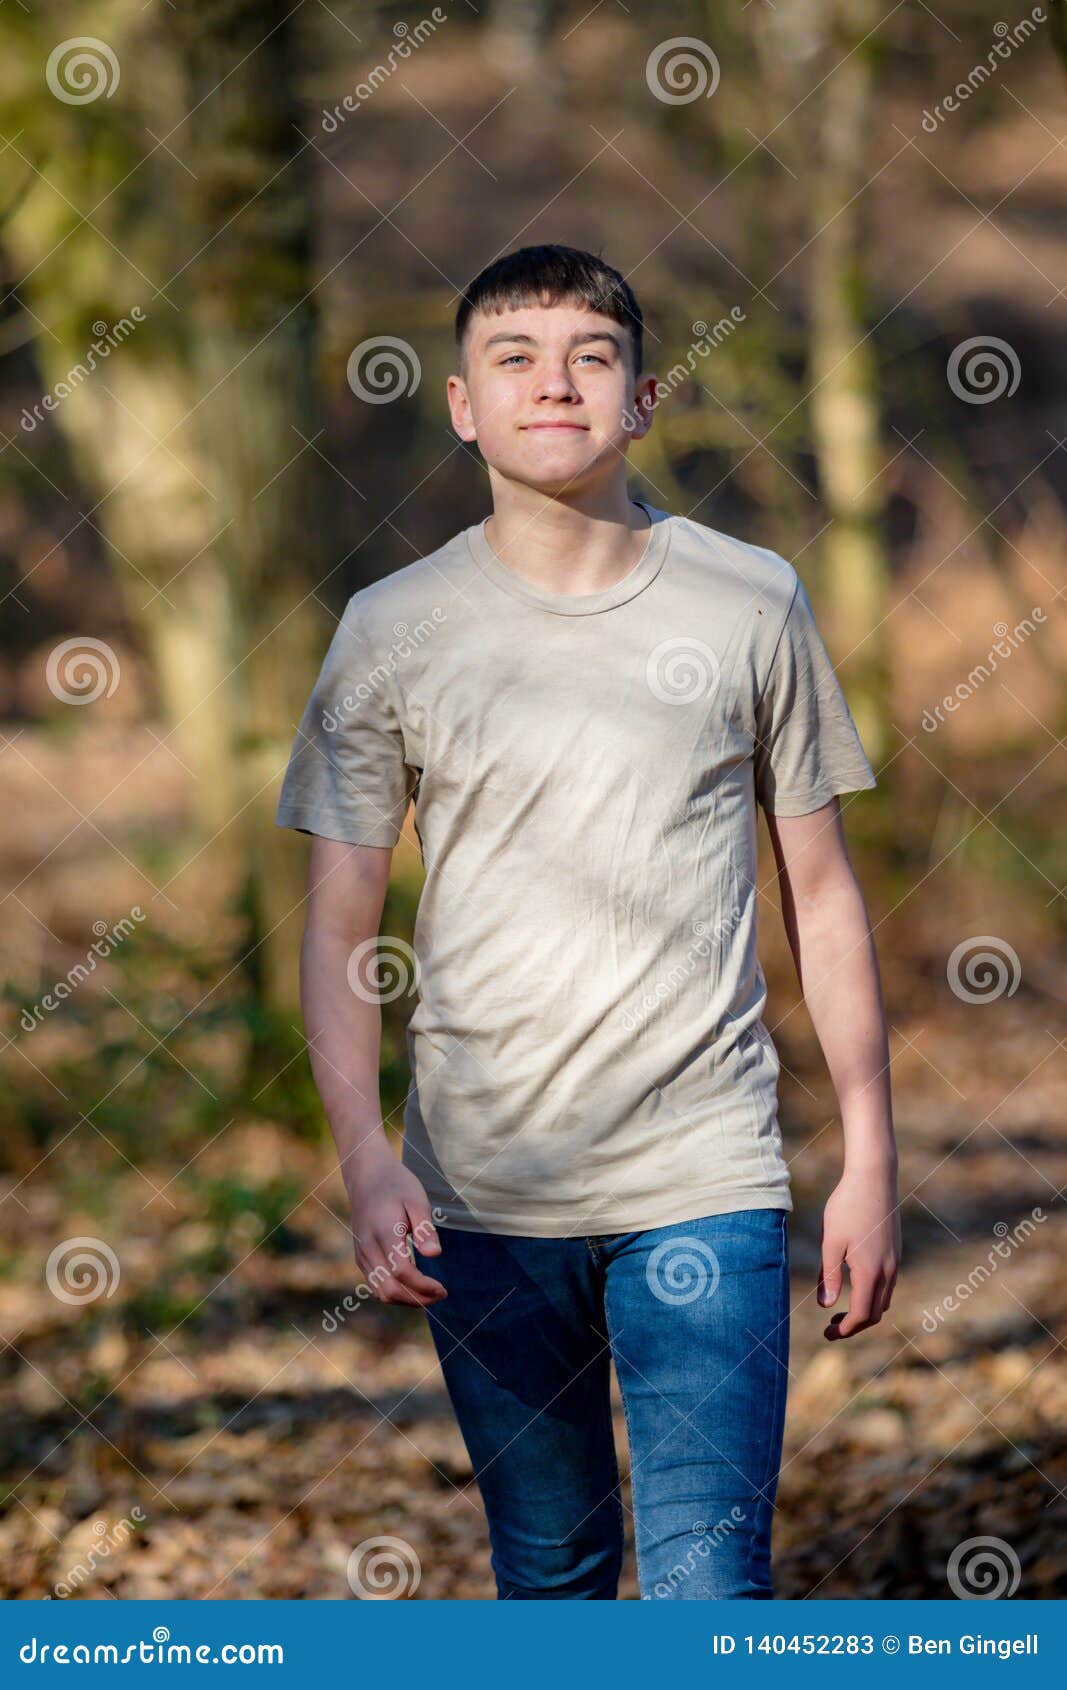 Teenage Boy Outside on a Bright Spring Day Stock Image - Image of ...